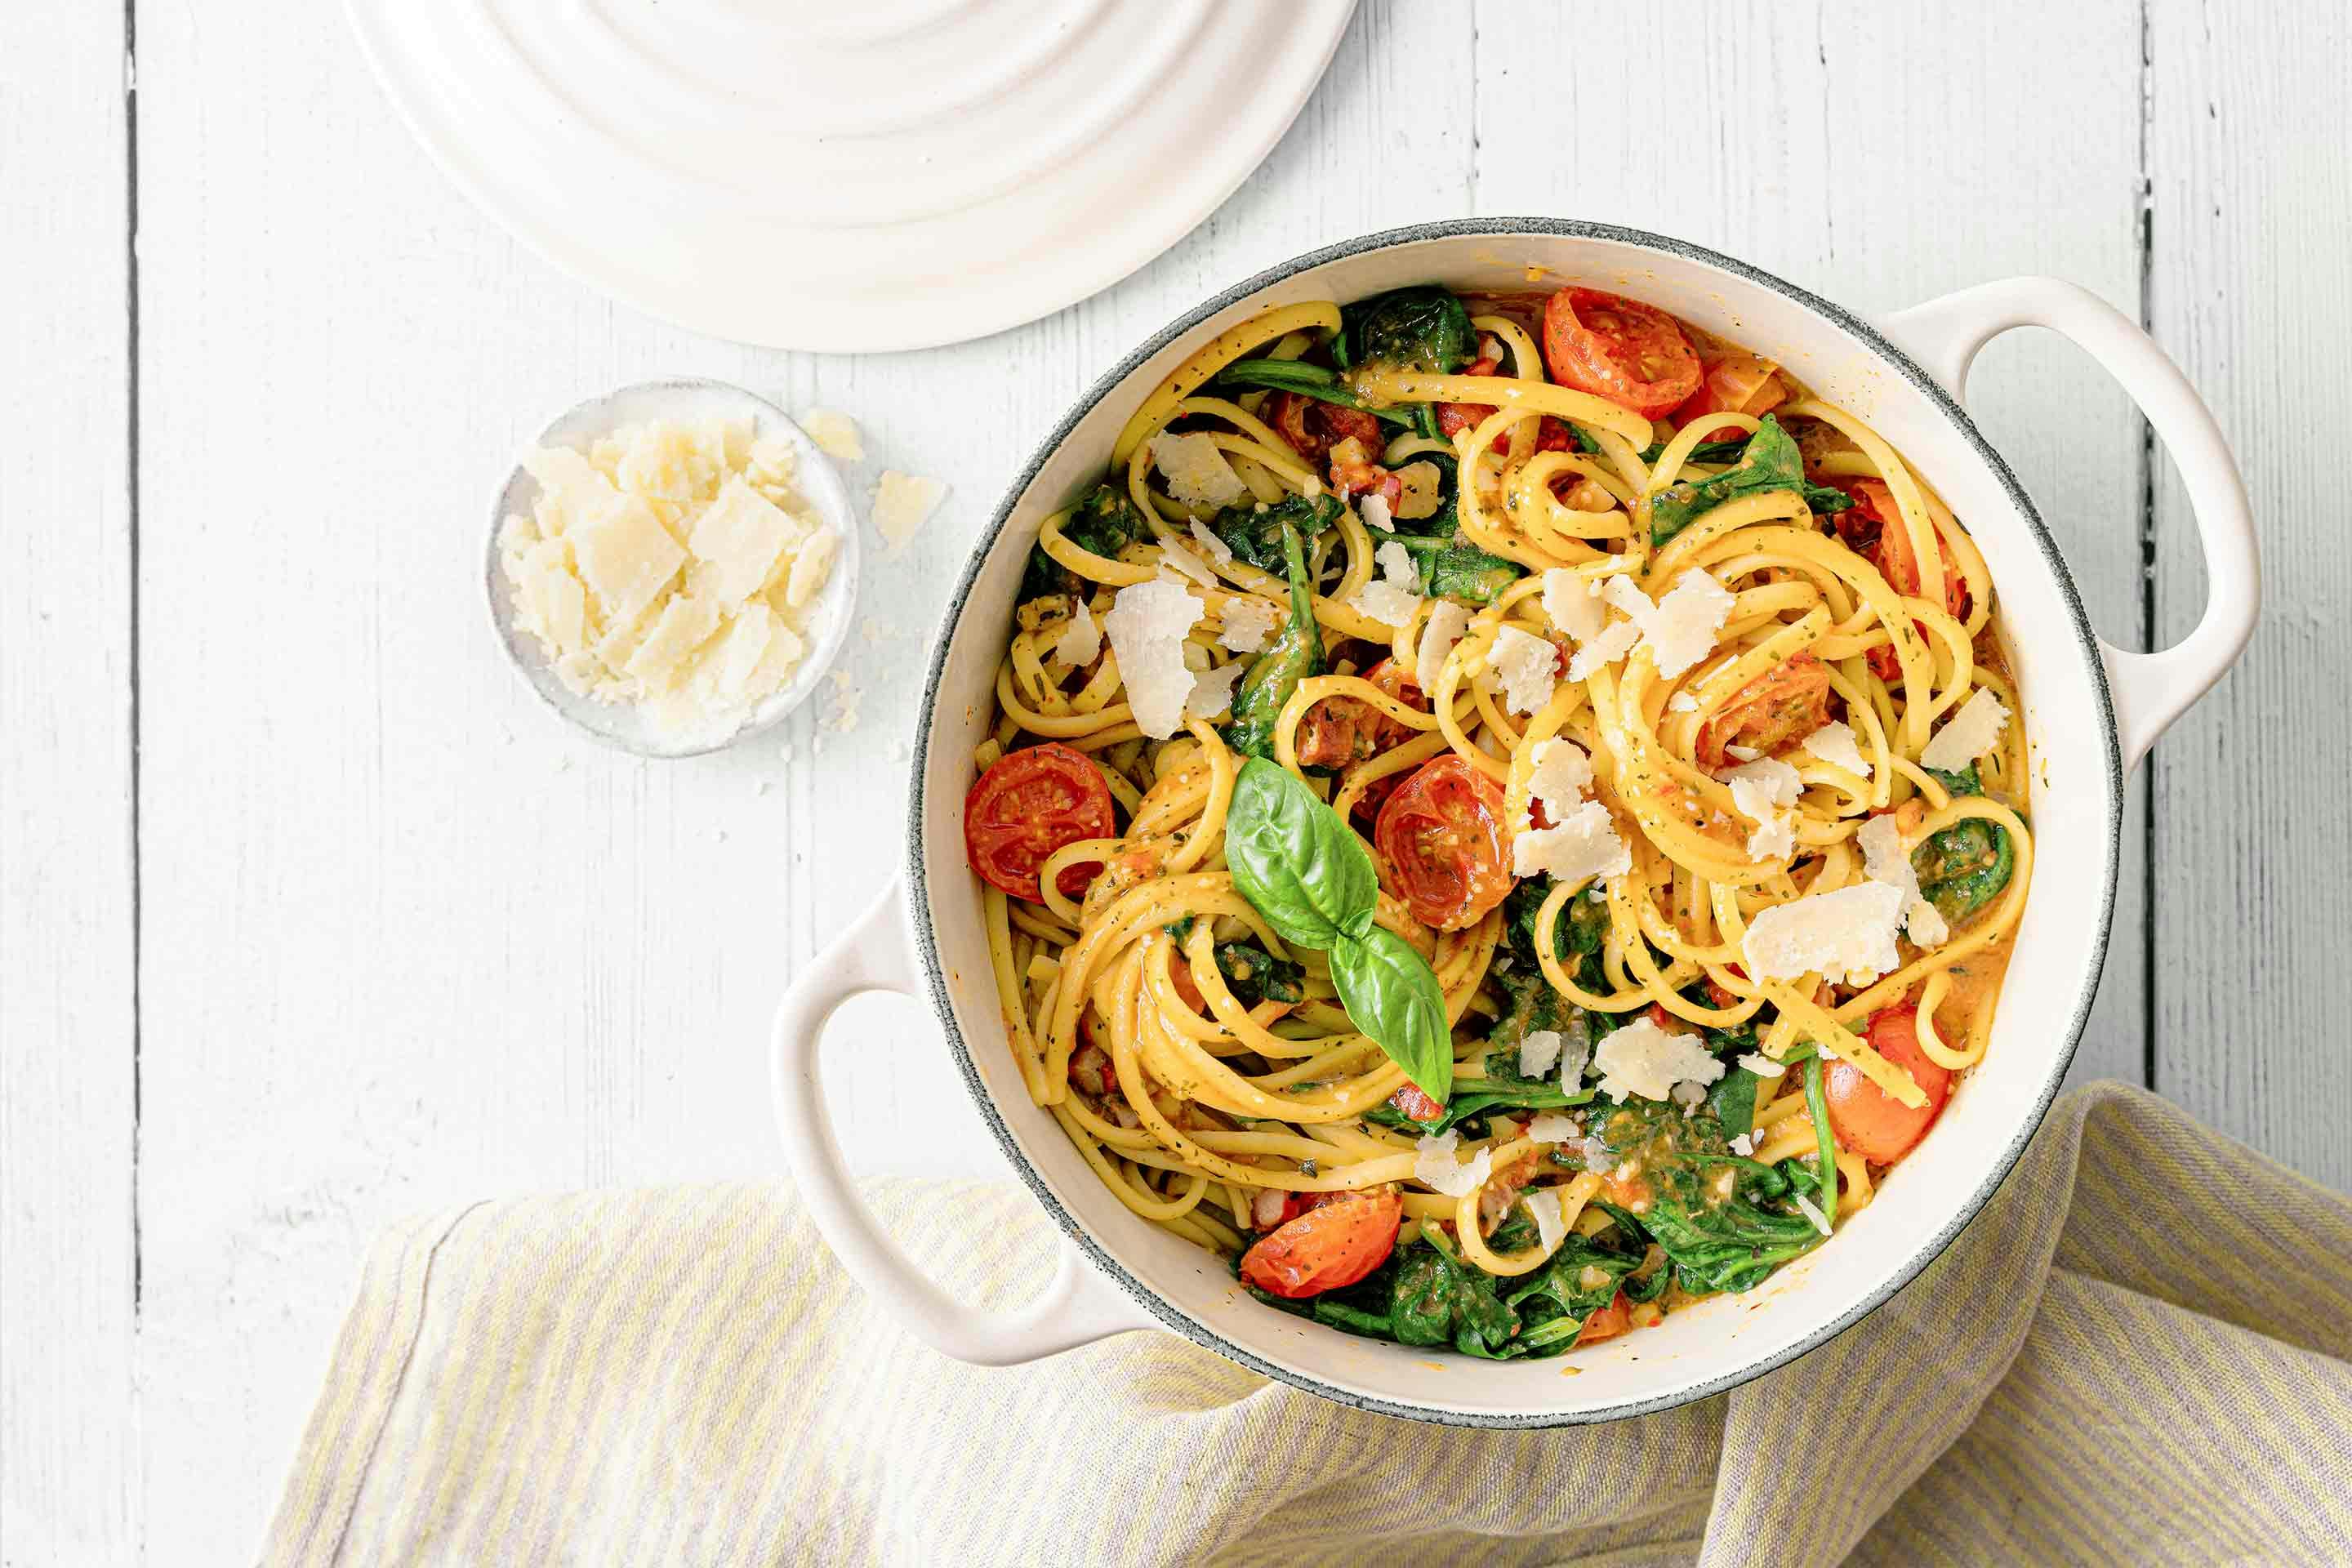 This bright and colorful recipe for one pot pasta can be enjoyed by the whole family.